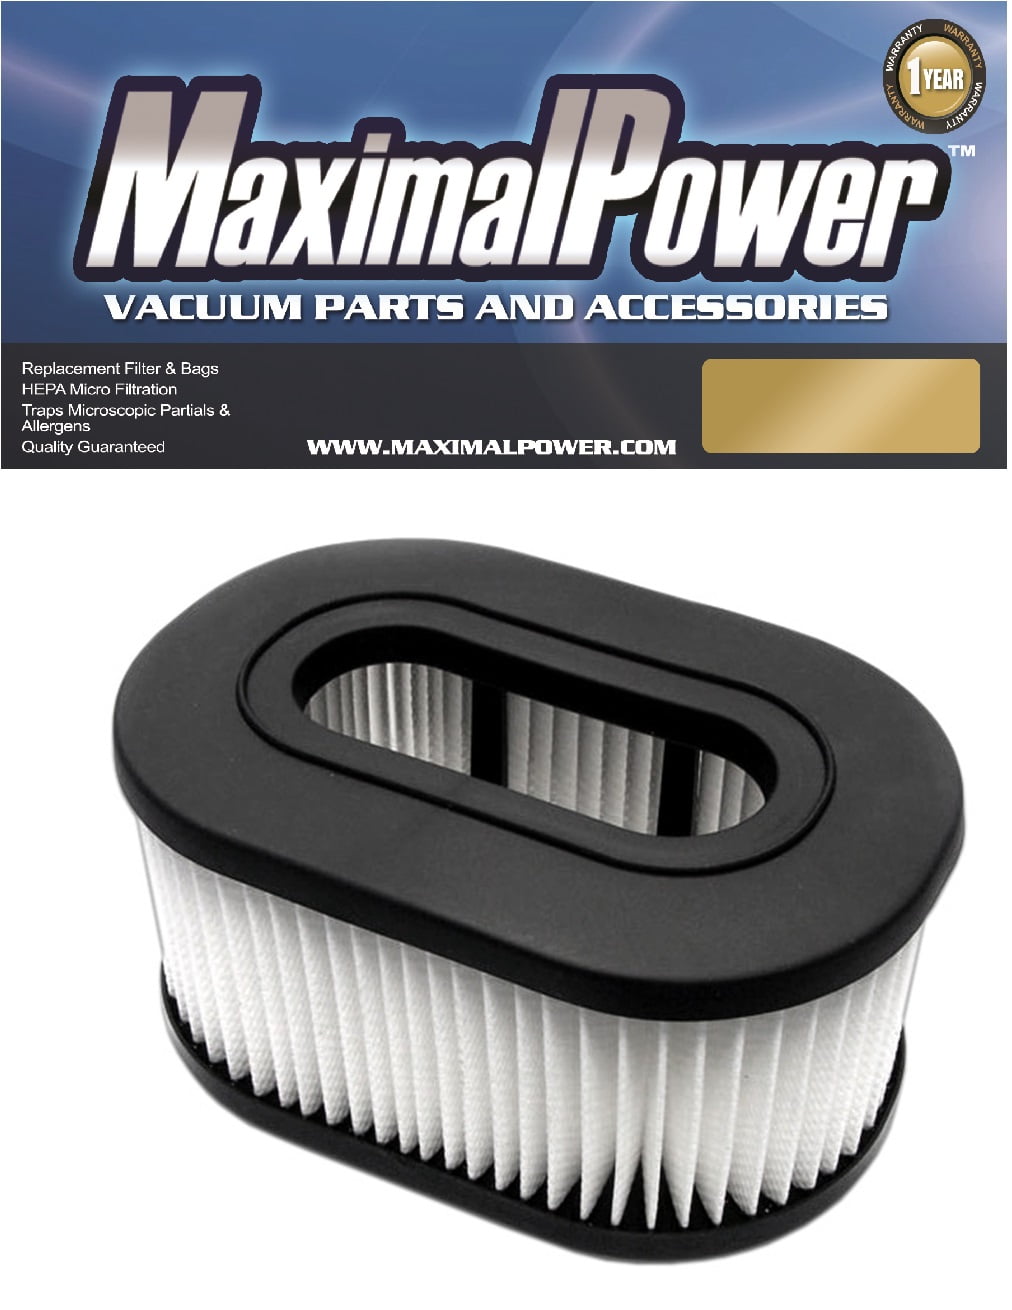 Details about   2x HQRP Washable Hepa Filters for Hoover TurboPower Fold Away Widepath Runabout 